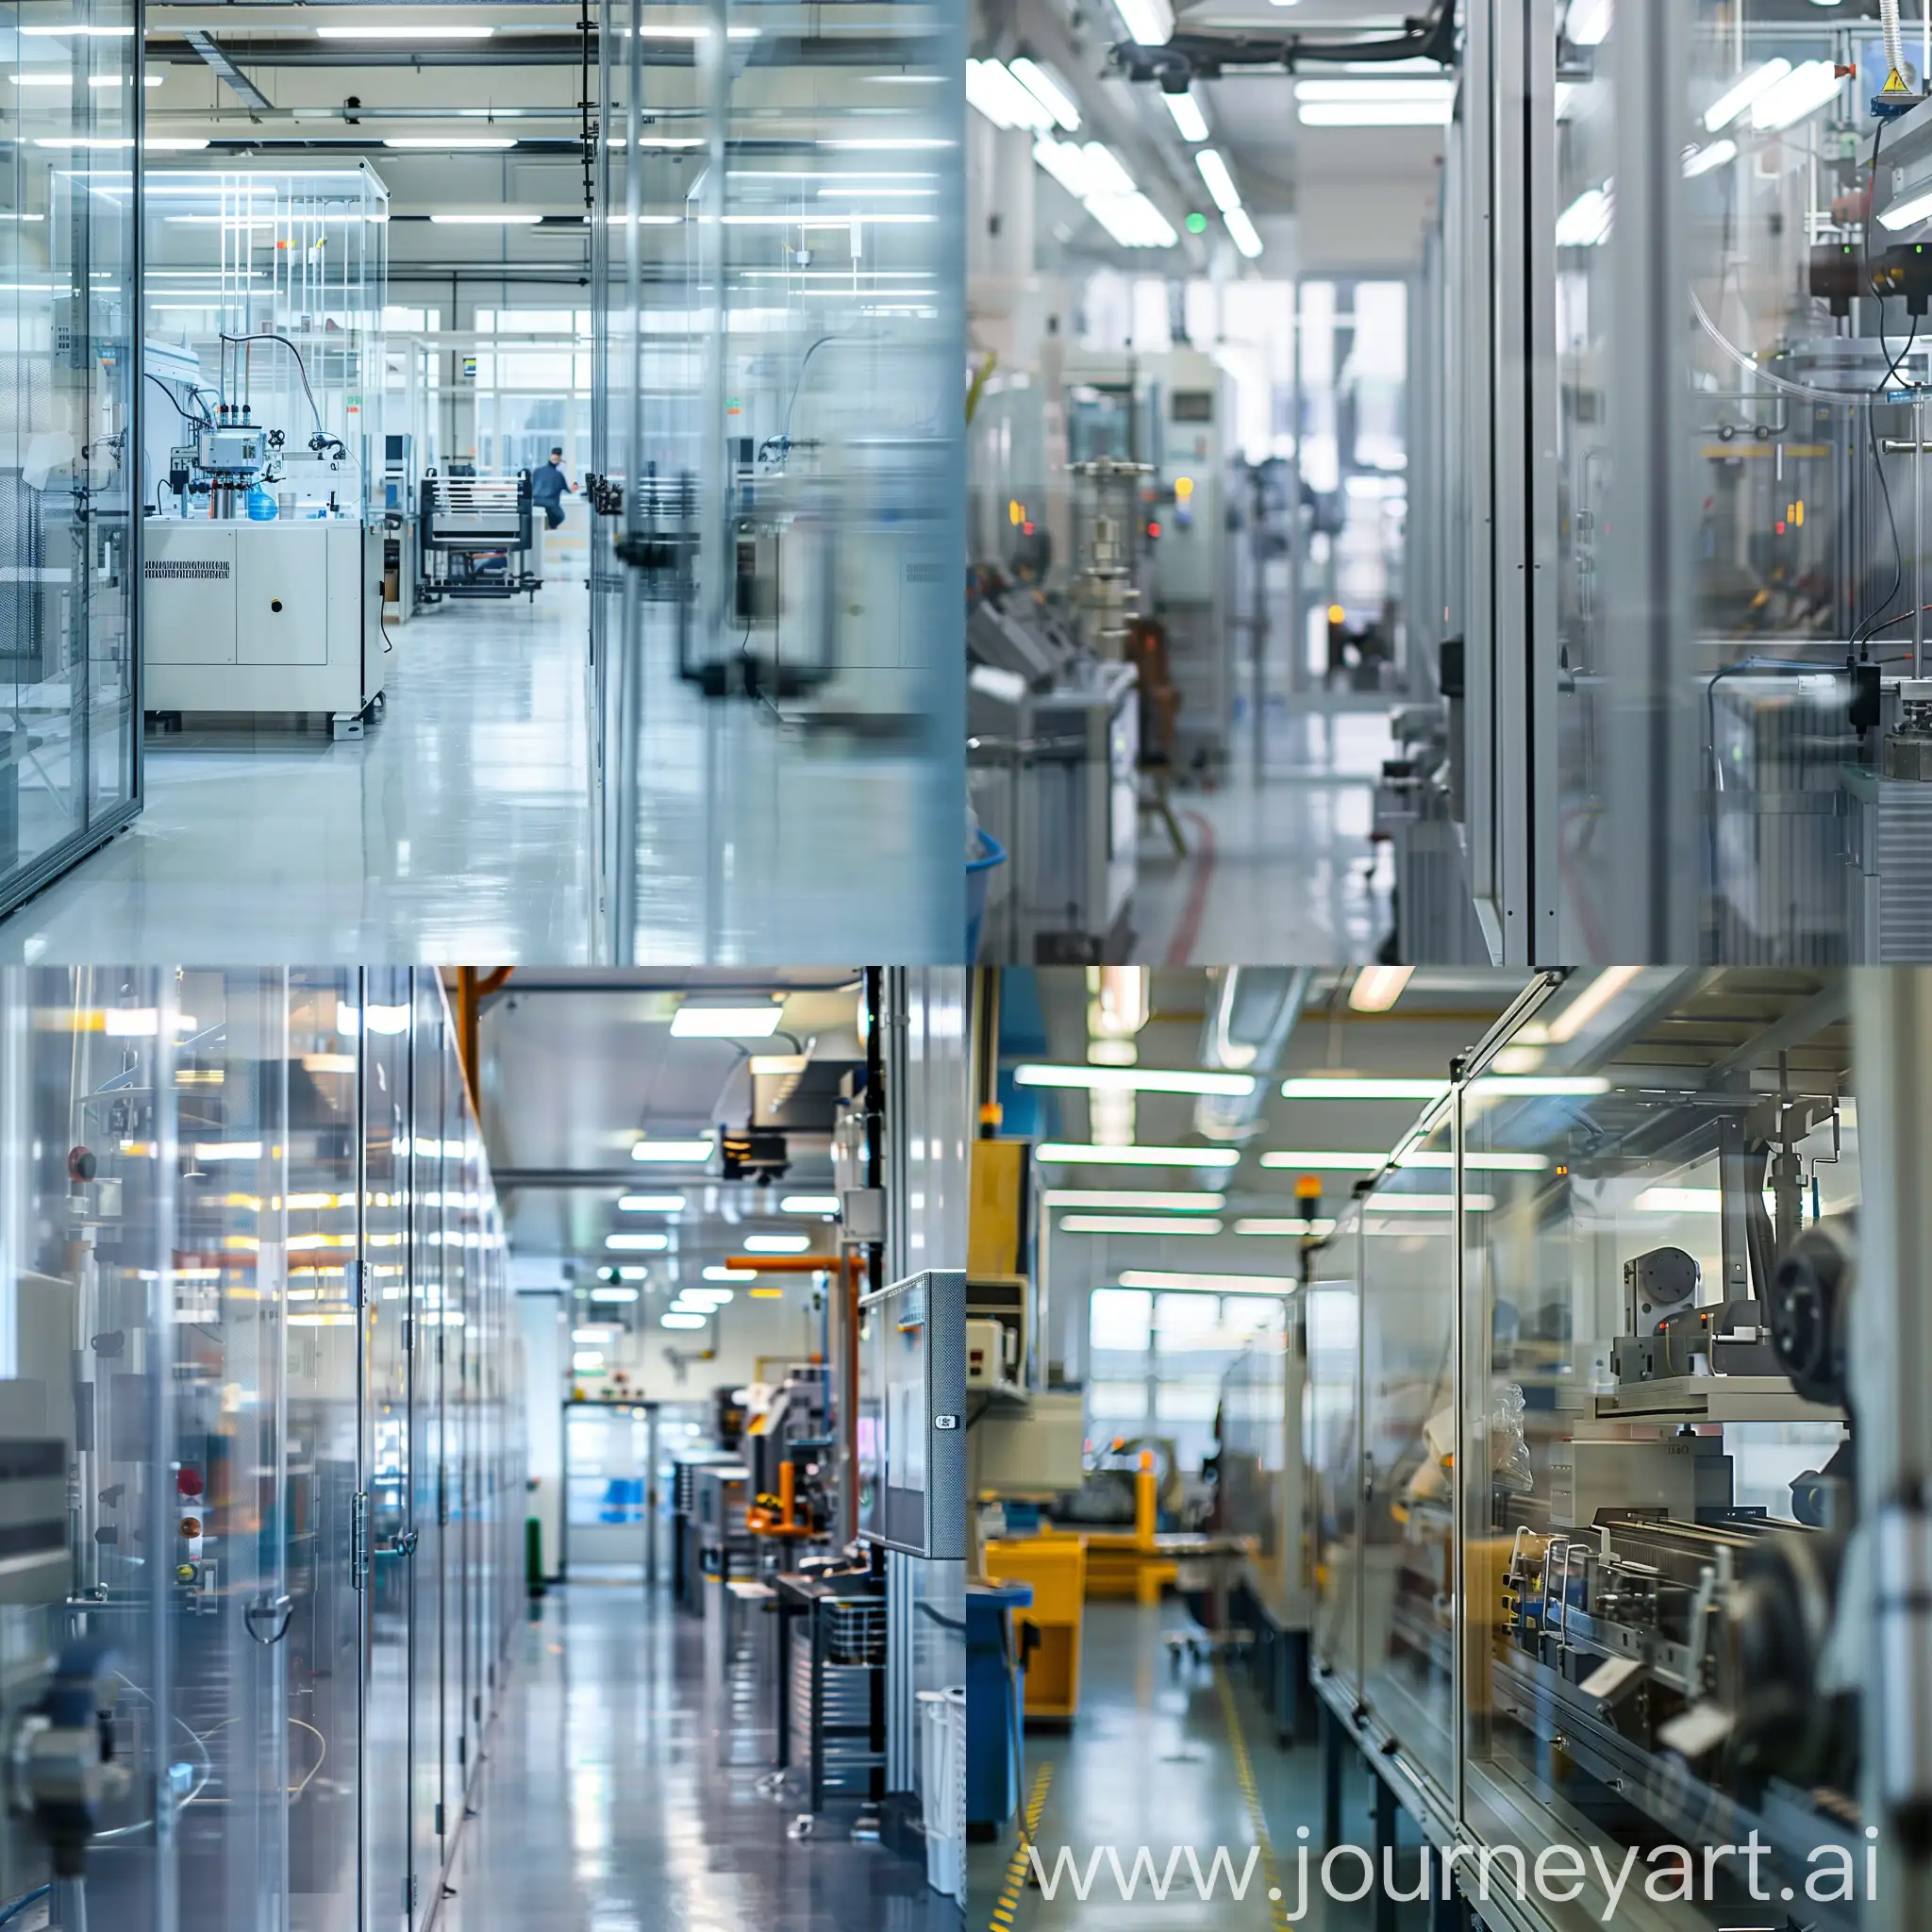 Industrial-Machinery-Room-with-Clear-Wall-View-Vibrant-and-Detailed-Image